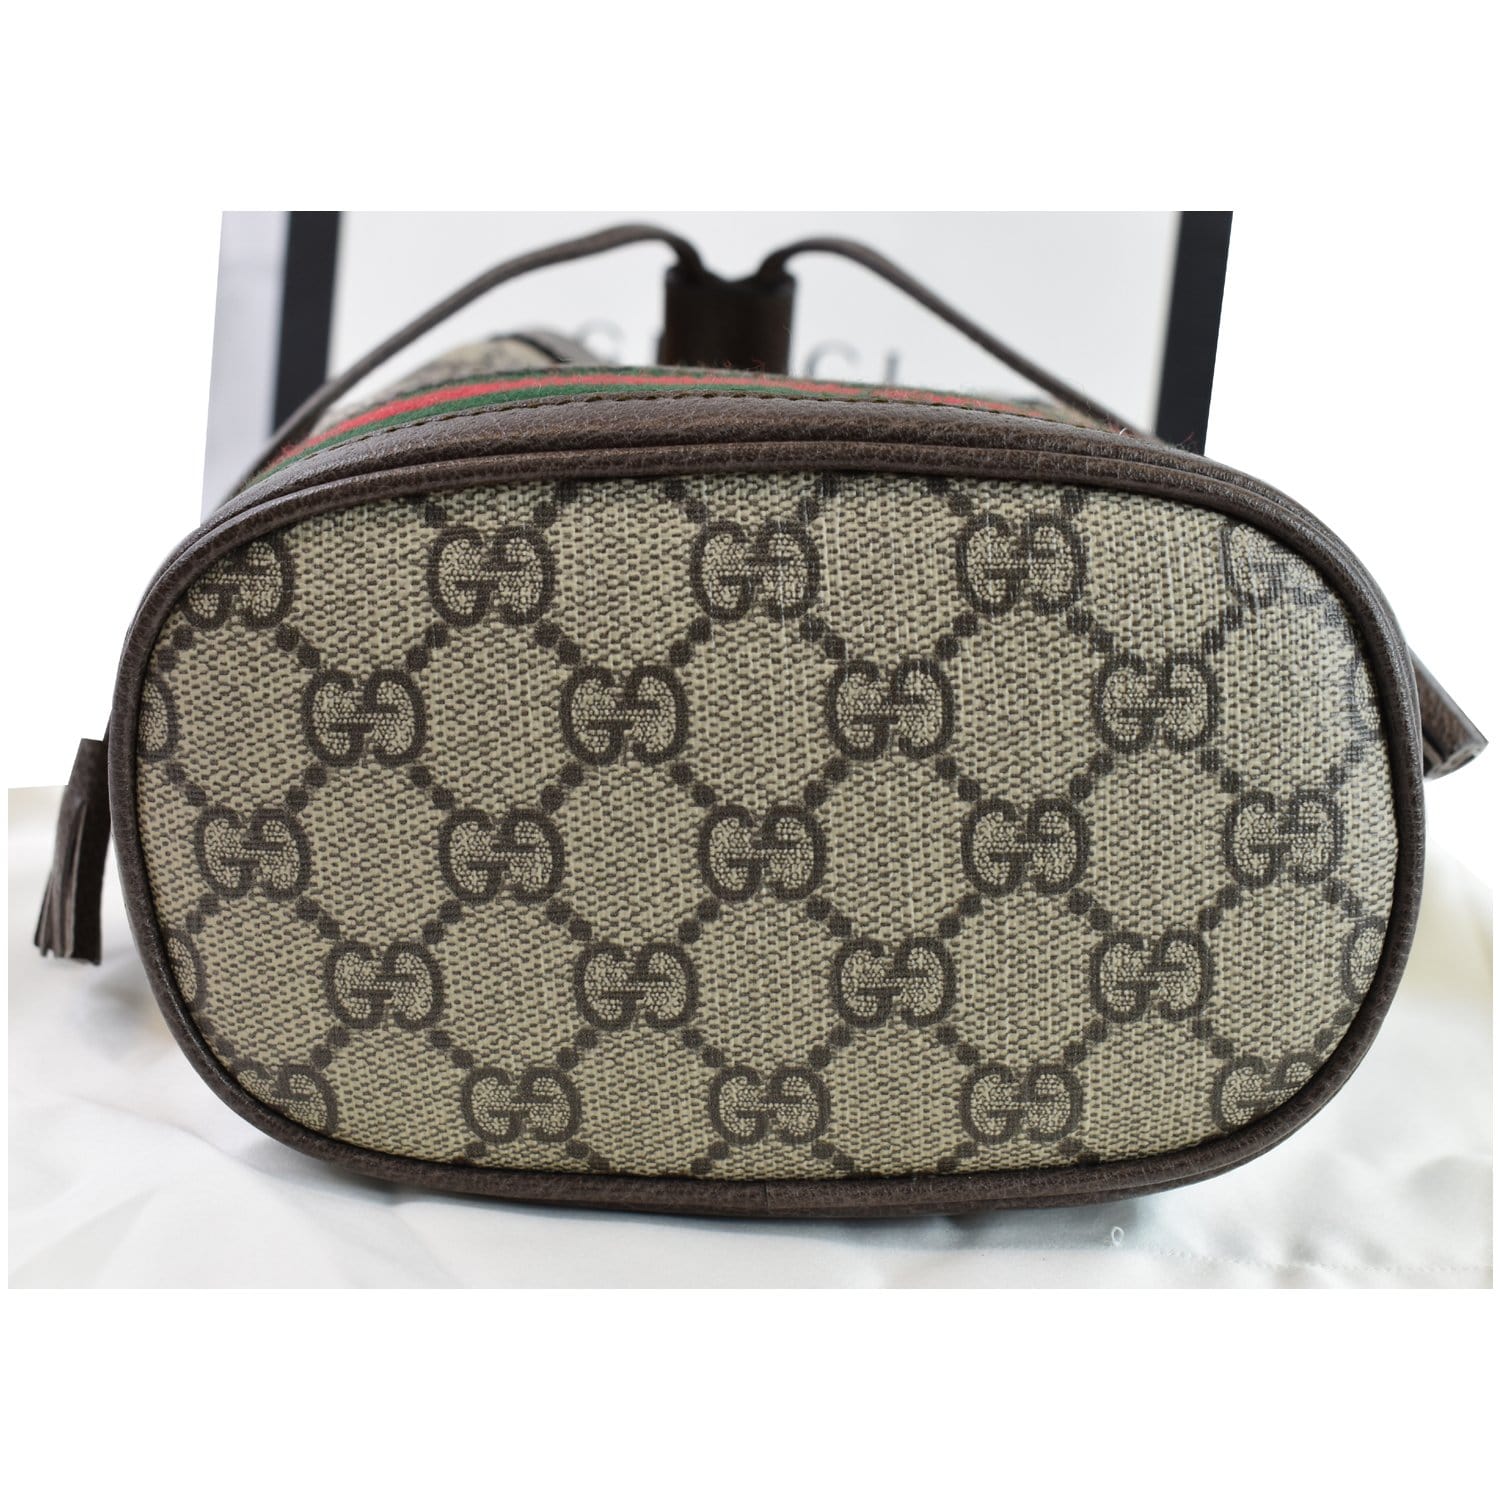 Ophidia GG small shoulder bag in beige and ebony GG Supreme